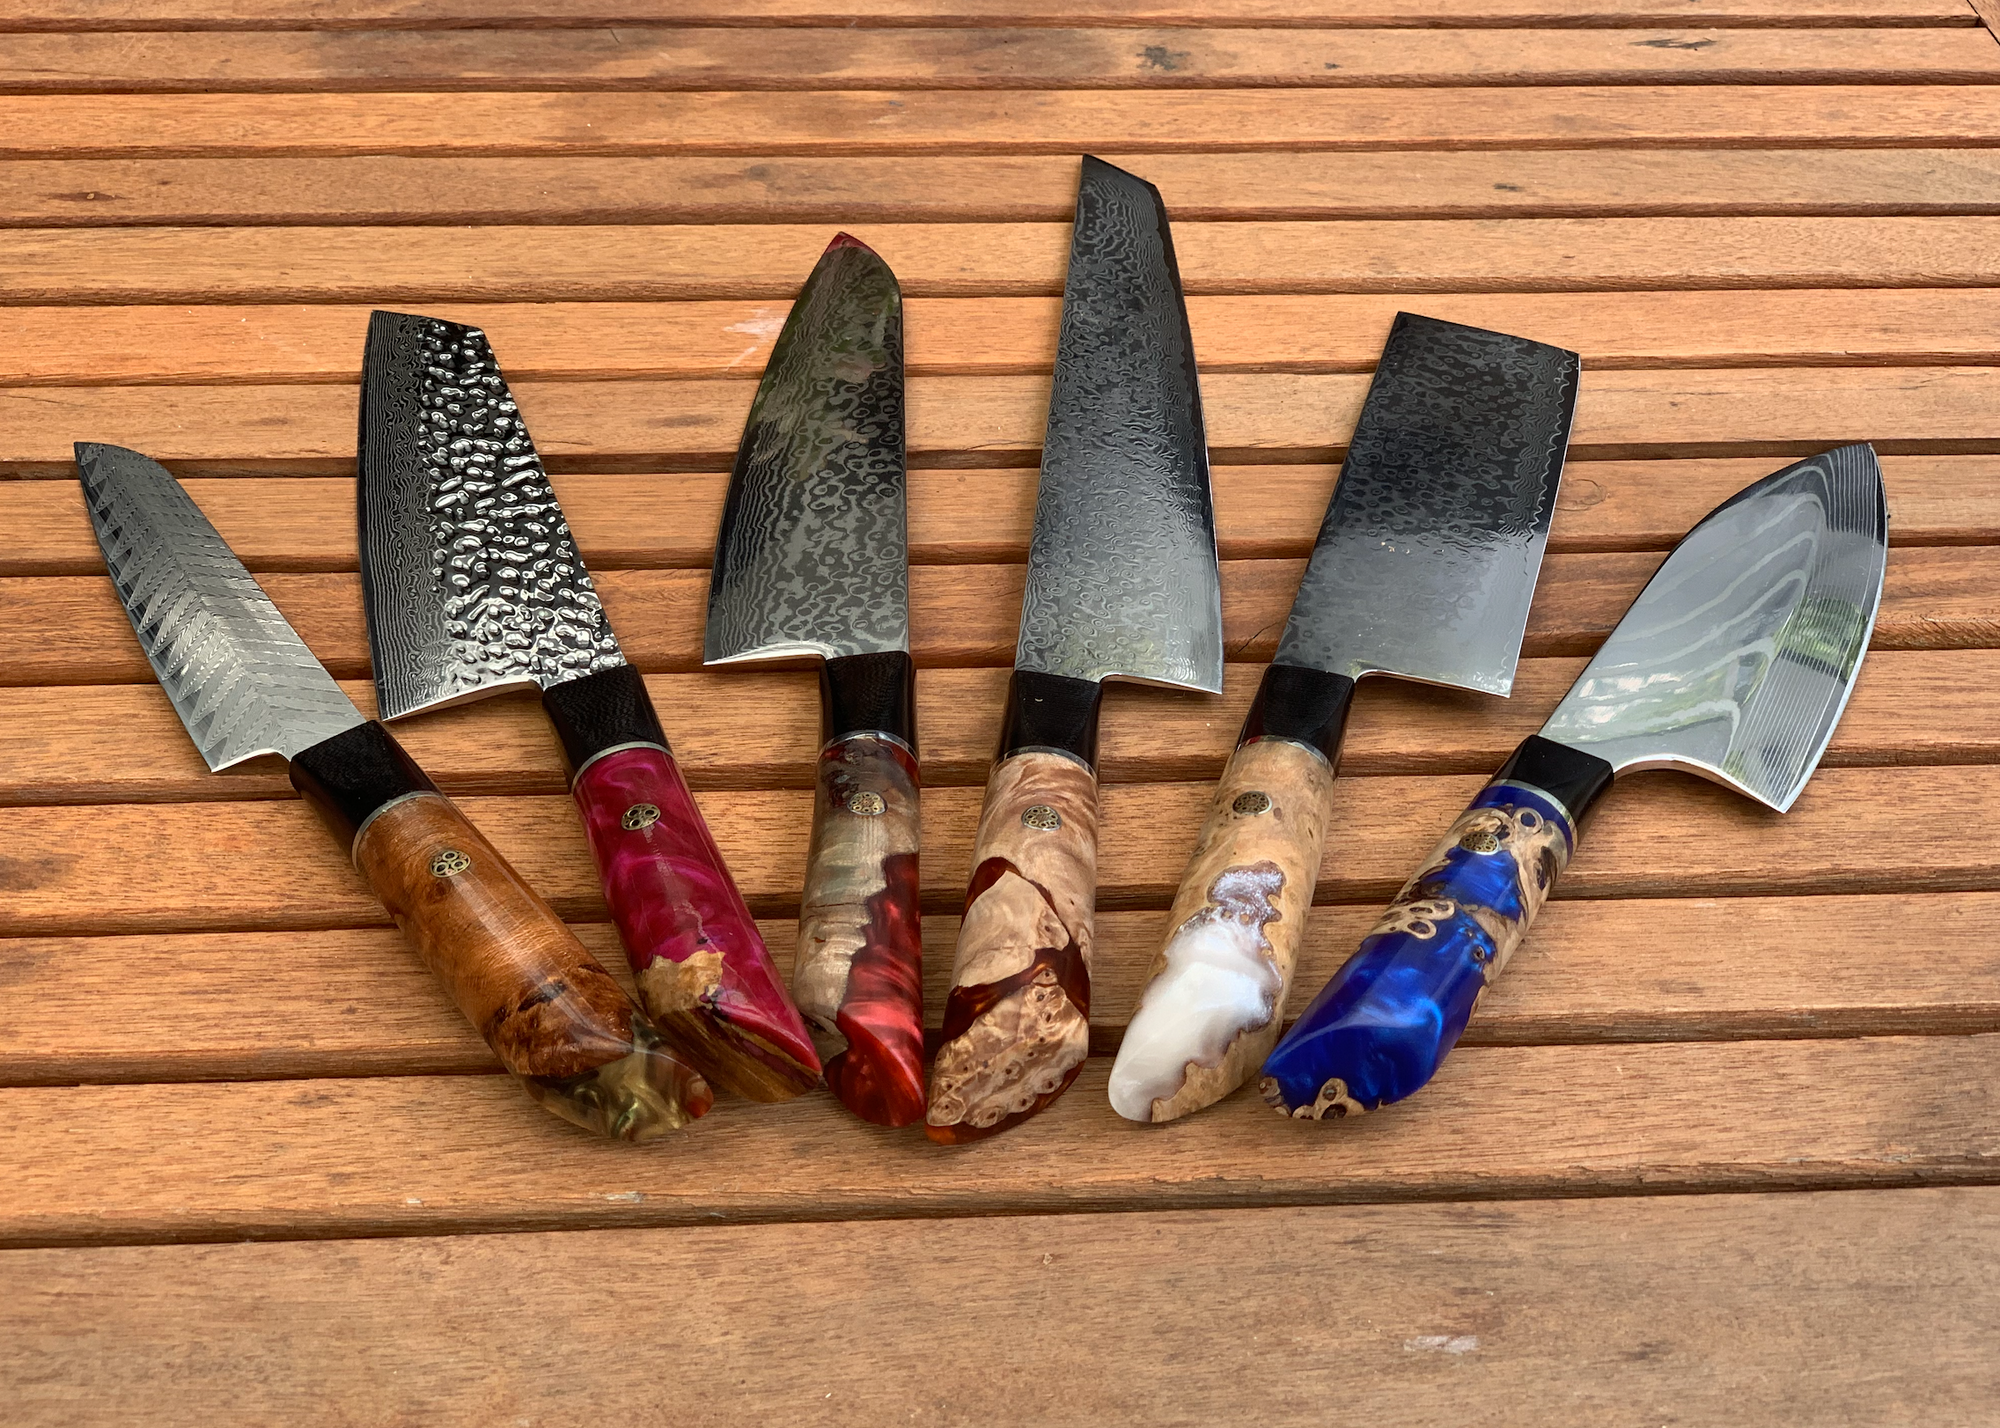 Damascus Knife Collection